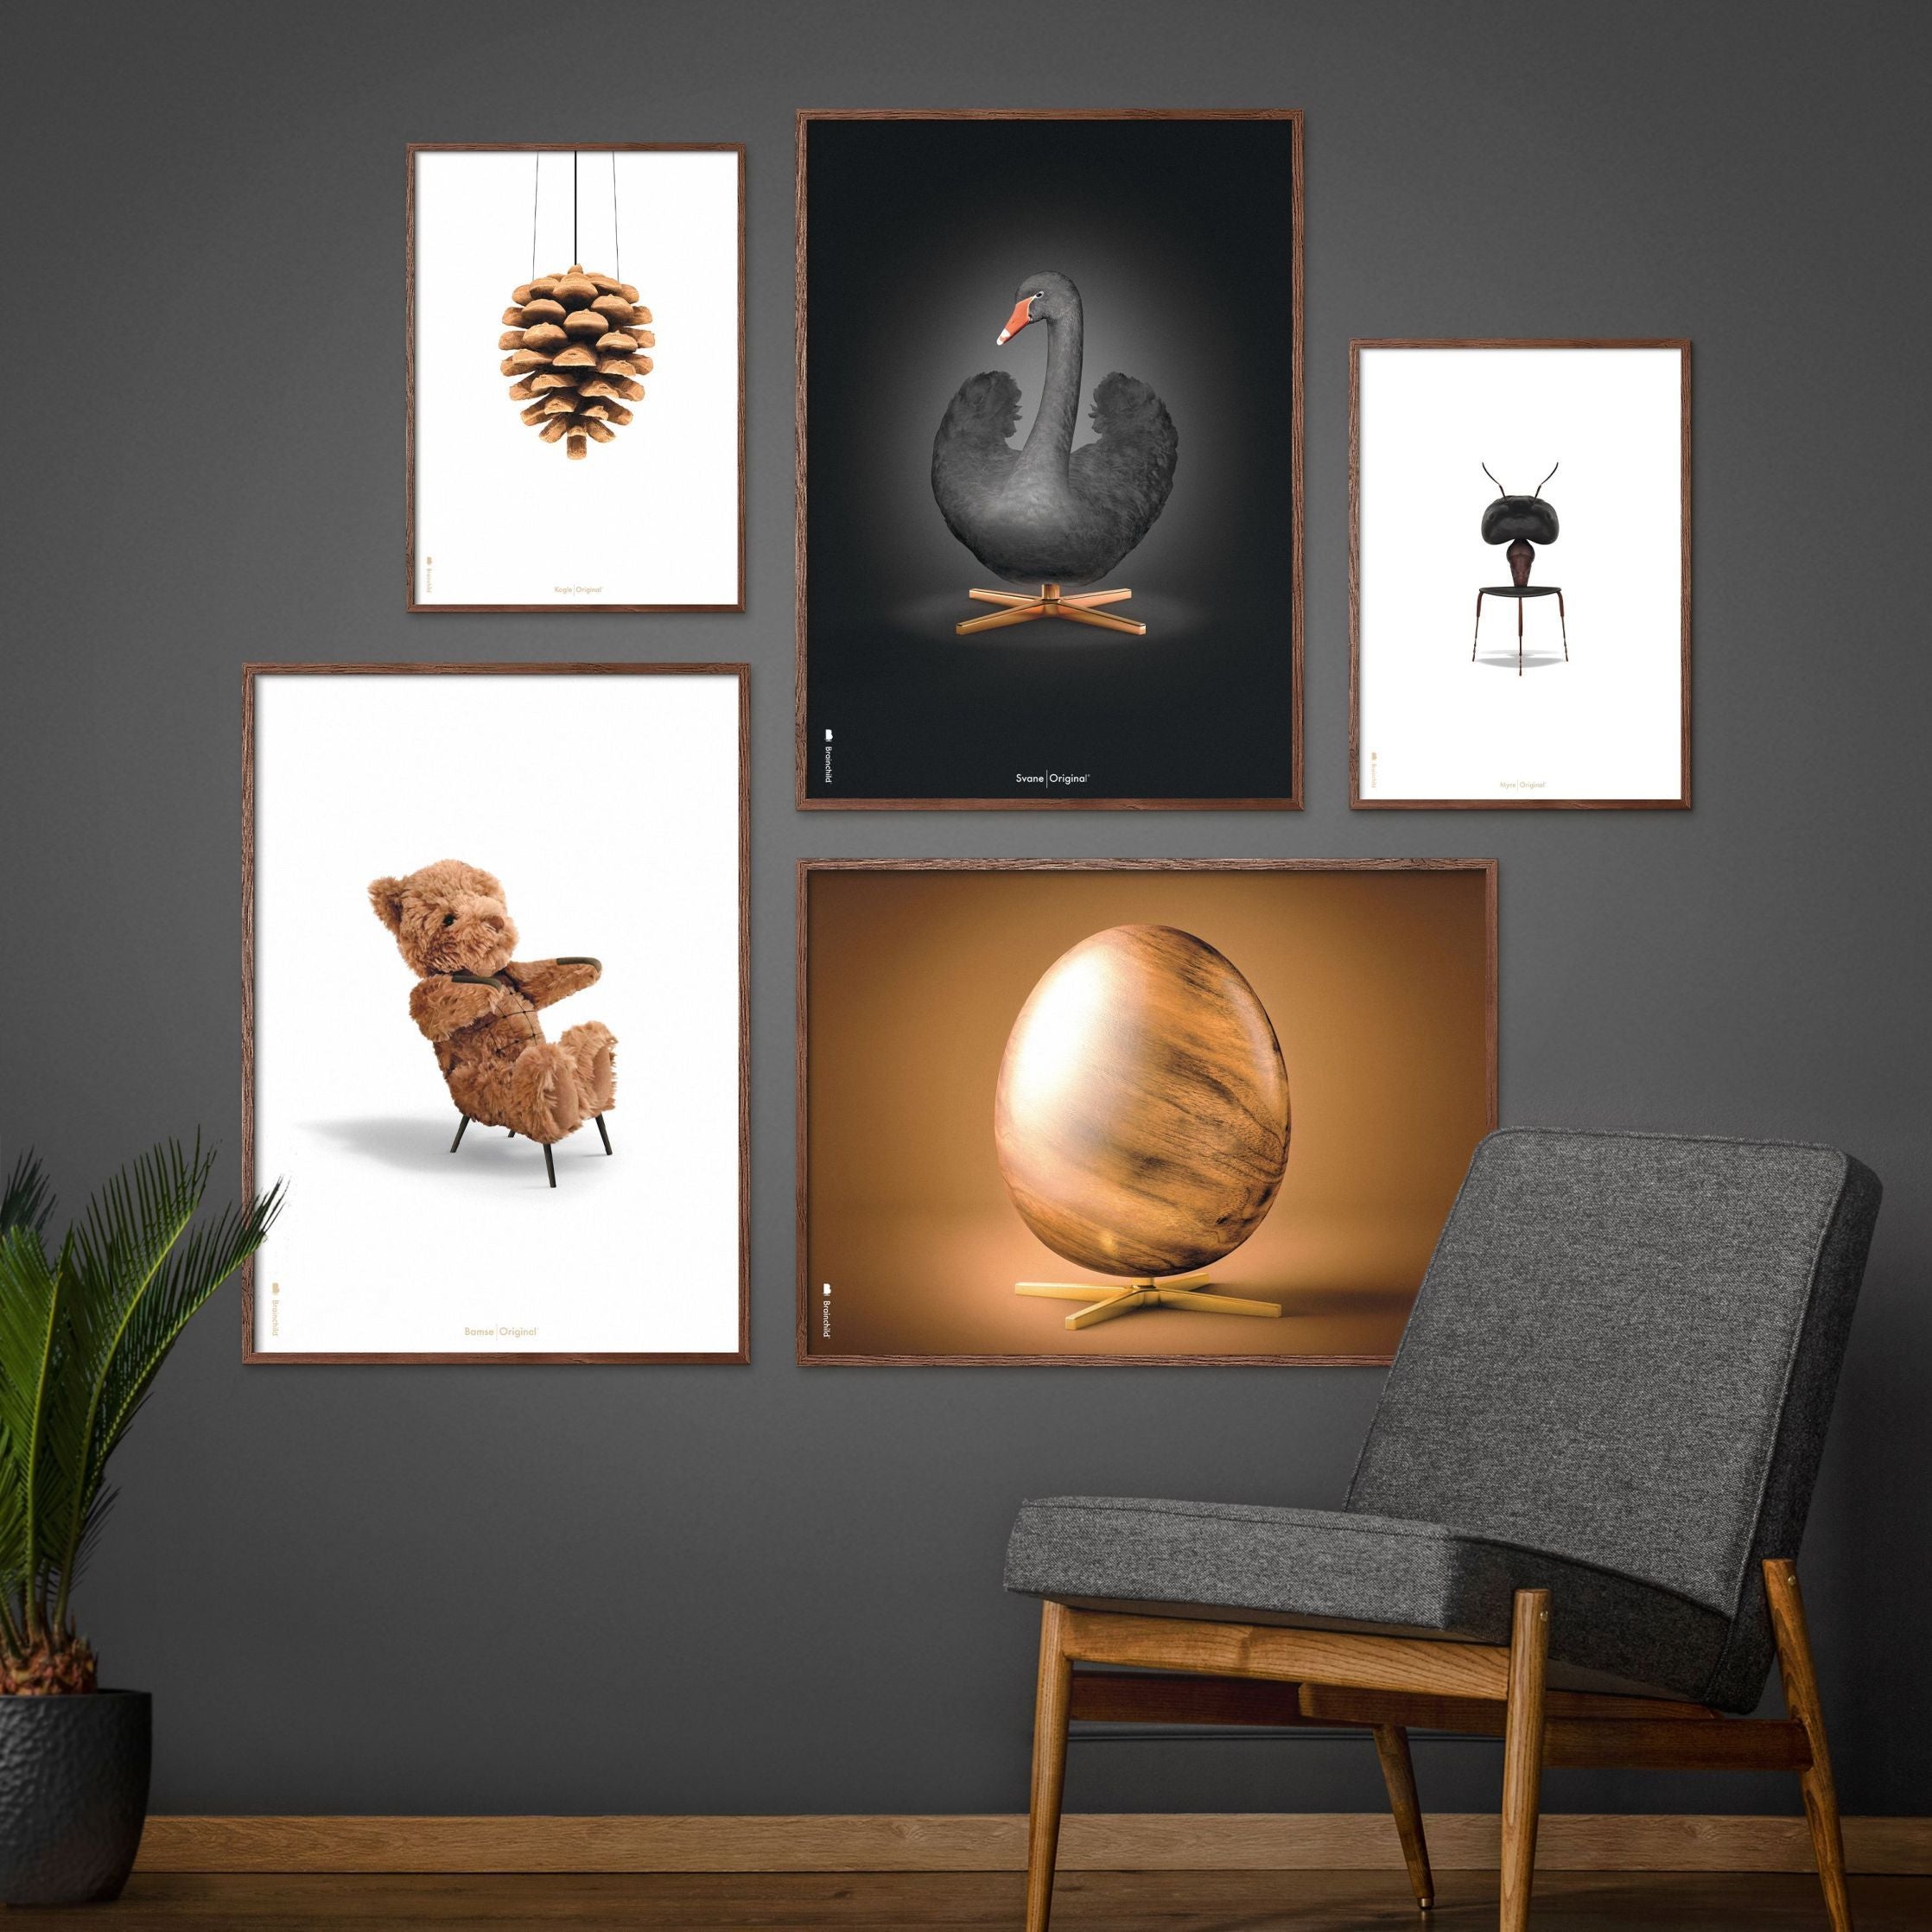 Brainchild Ant Classic Poster, Frame In Black Lacquered Wood A5, White Background